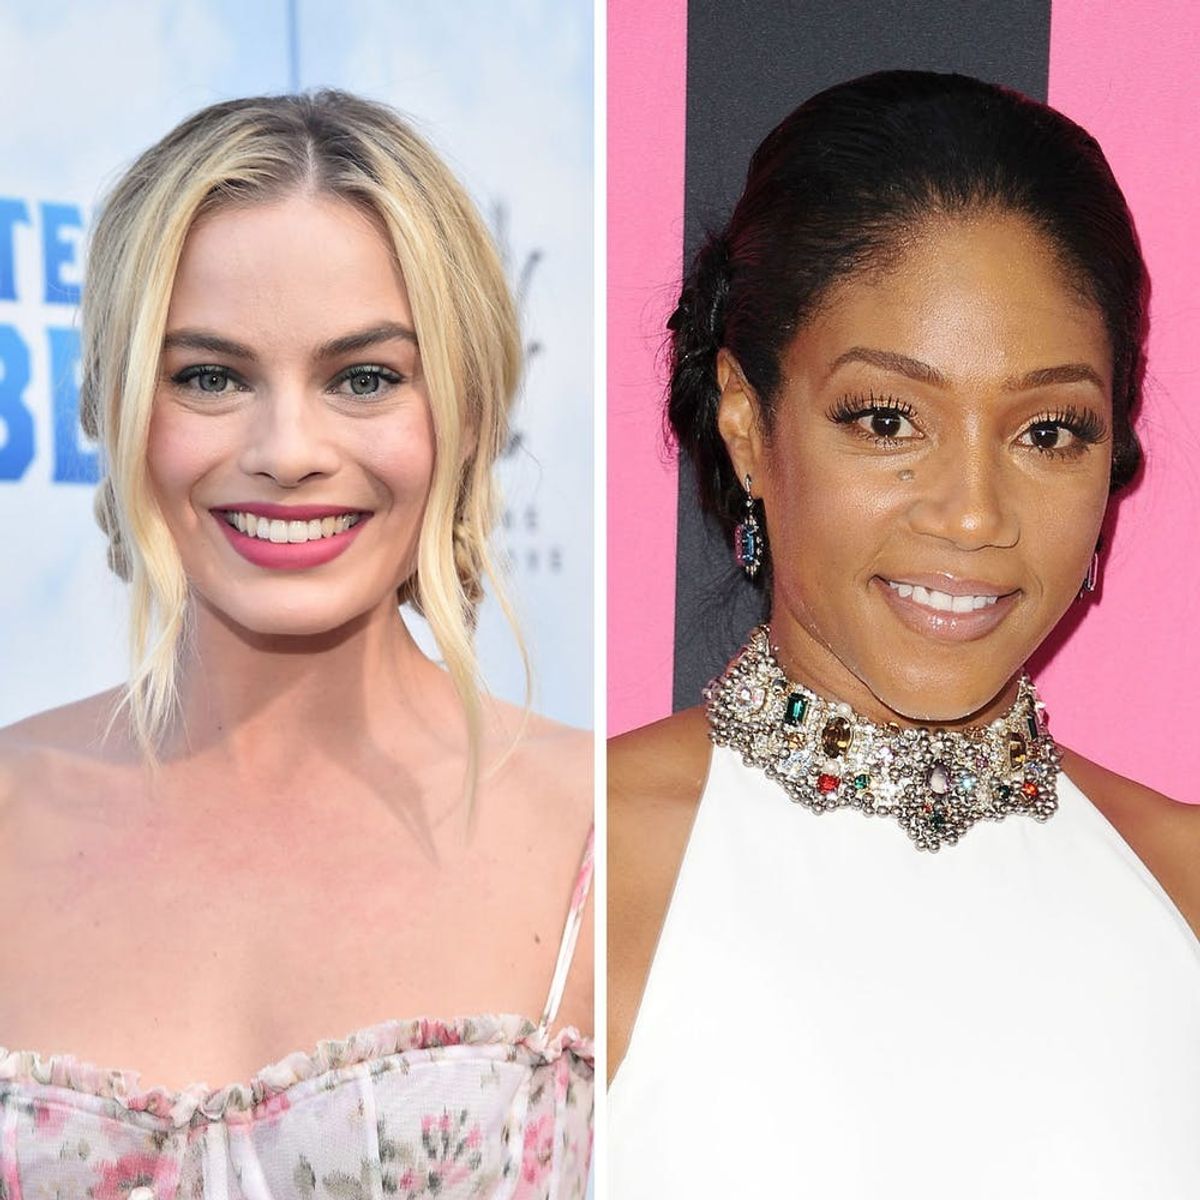 Oscars 2018 Presenters Include Margot Robbie, Tiffany Haddish, Emma Stone, and More of Your Fave Stars